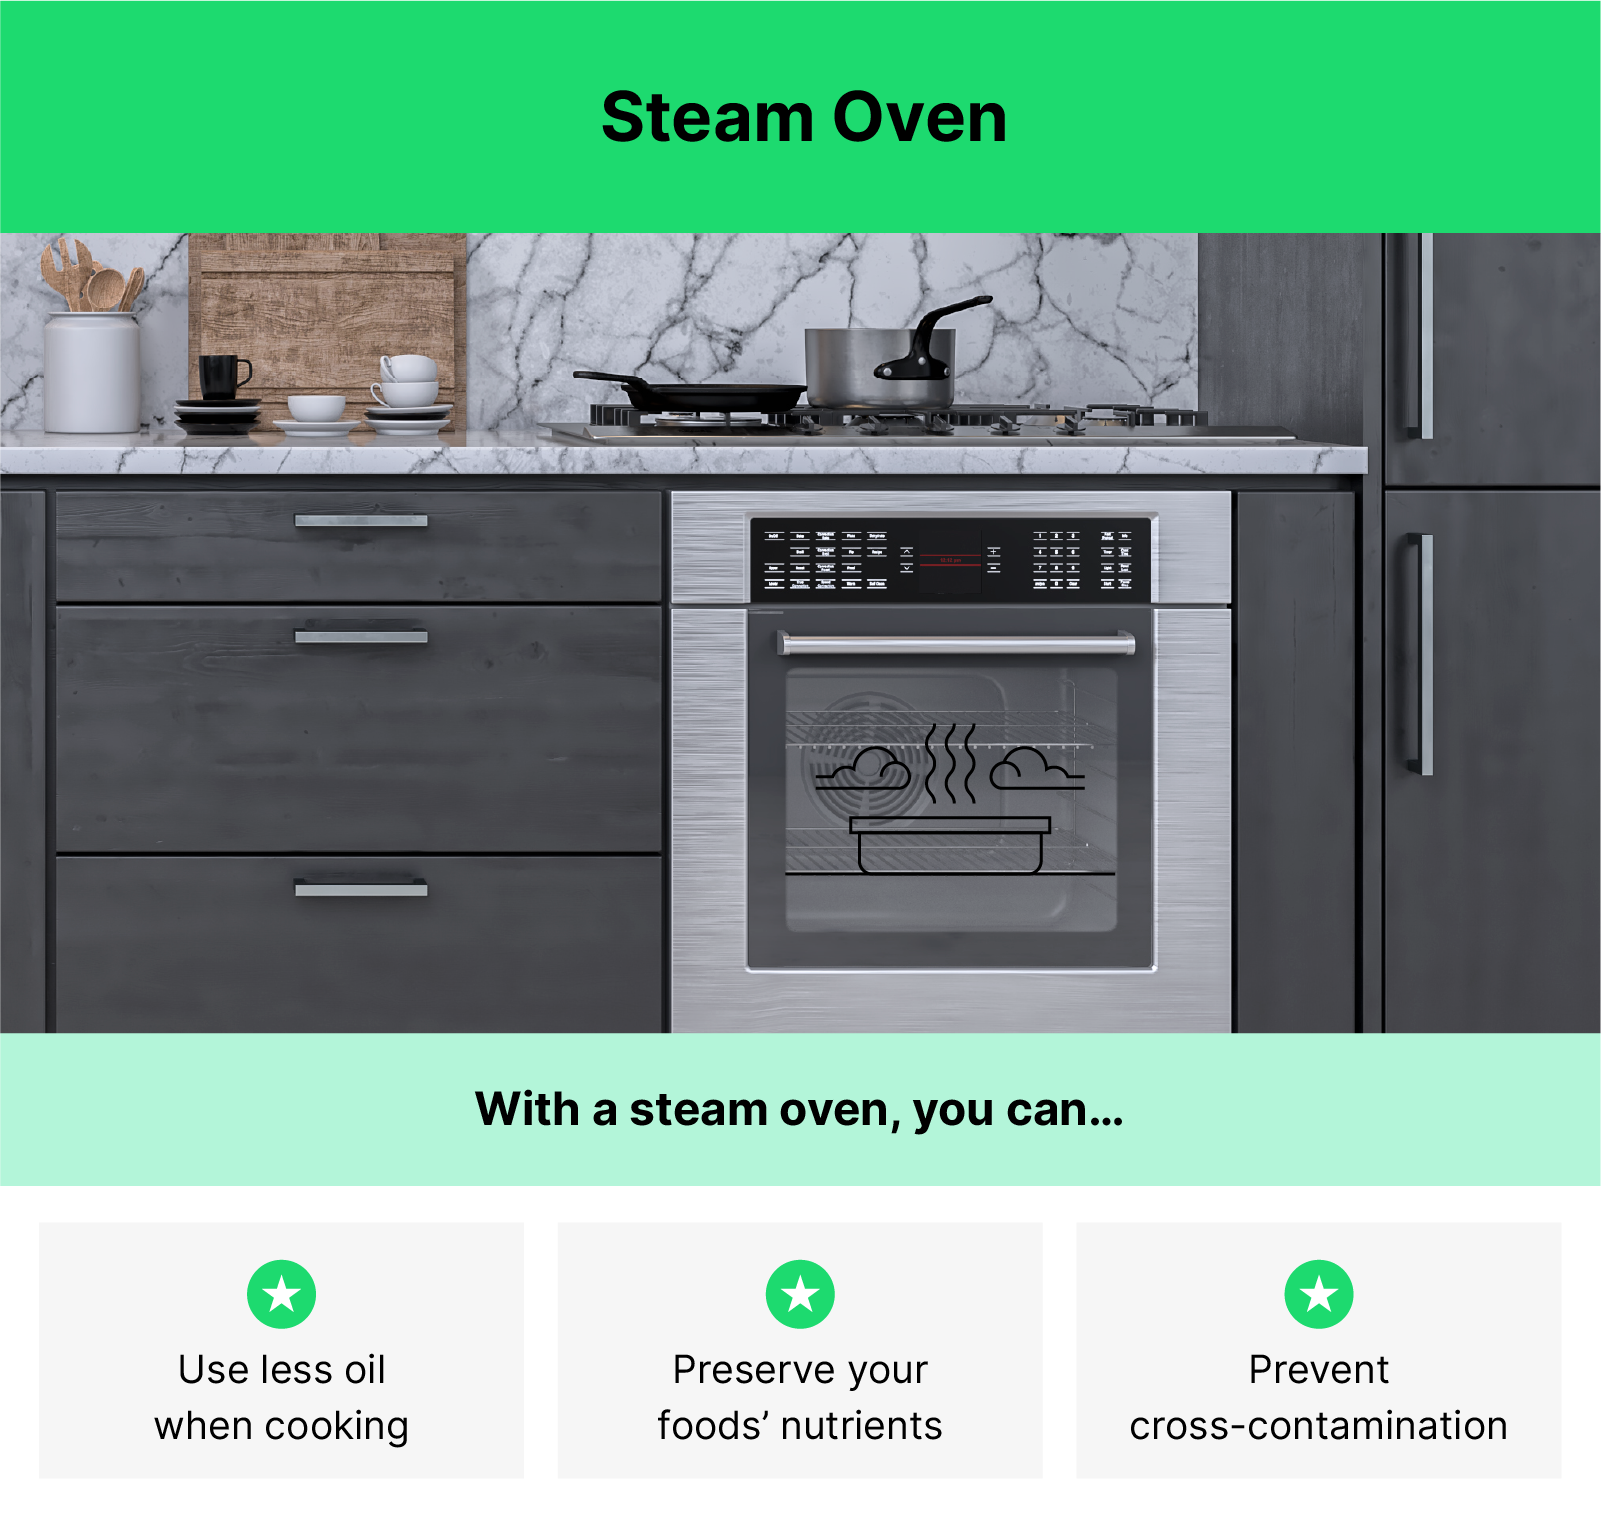 An image of an in-counter oven with an illustrated image of a baking dish inside with steam coming off